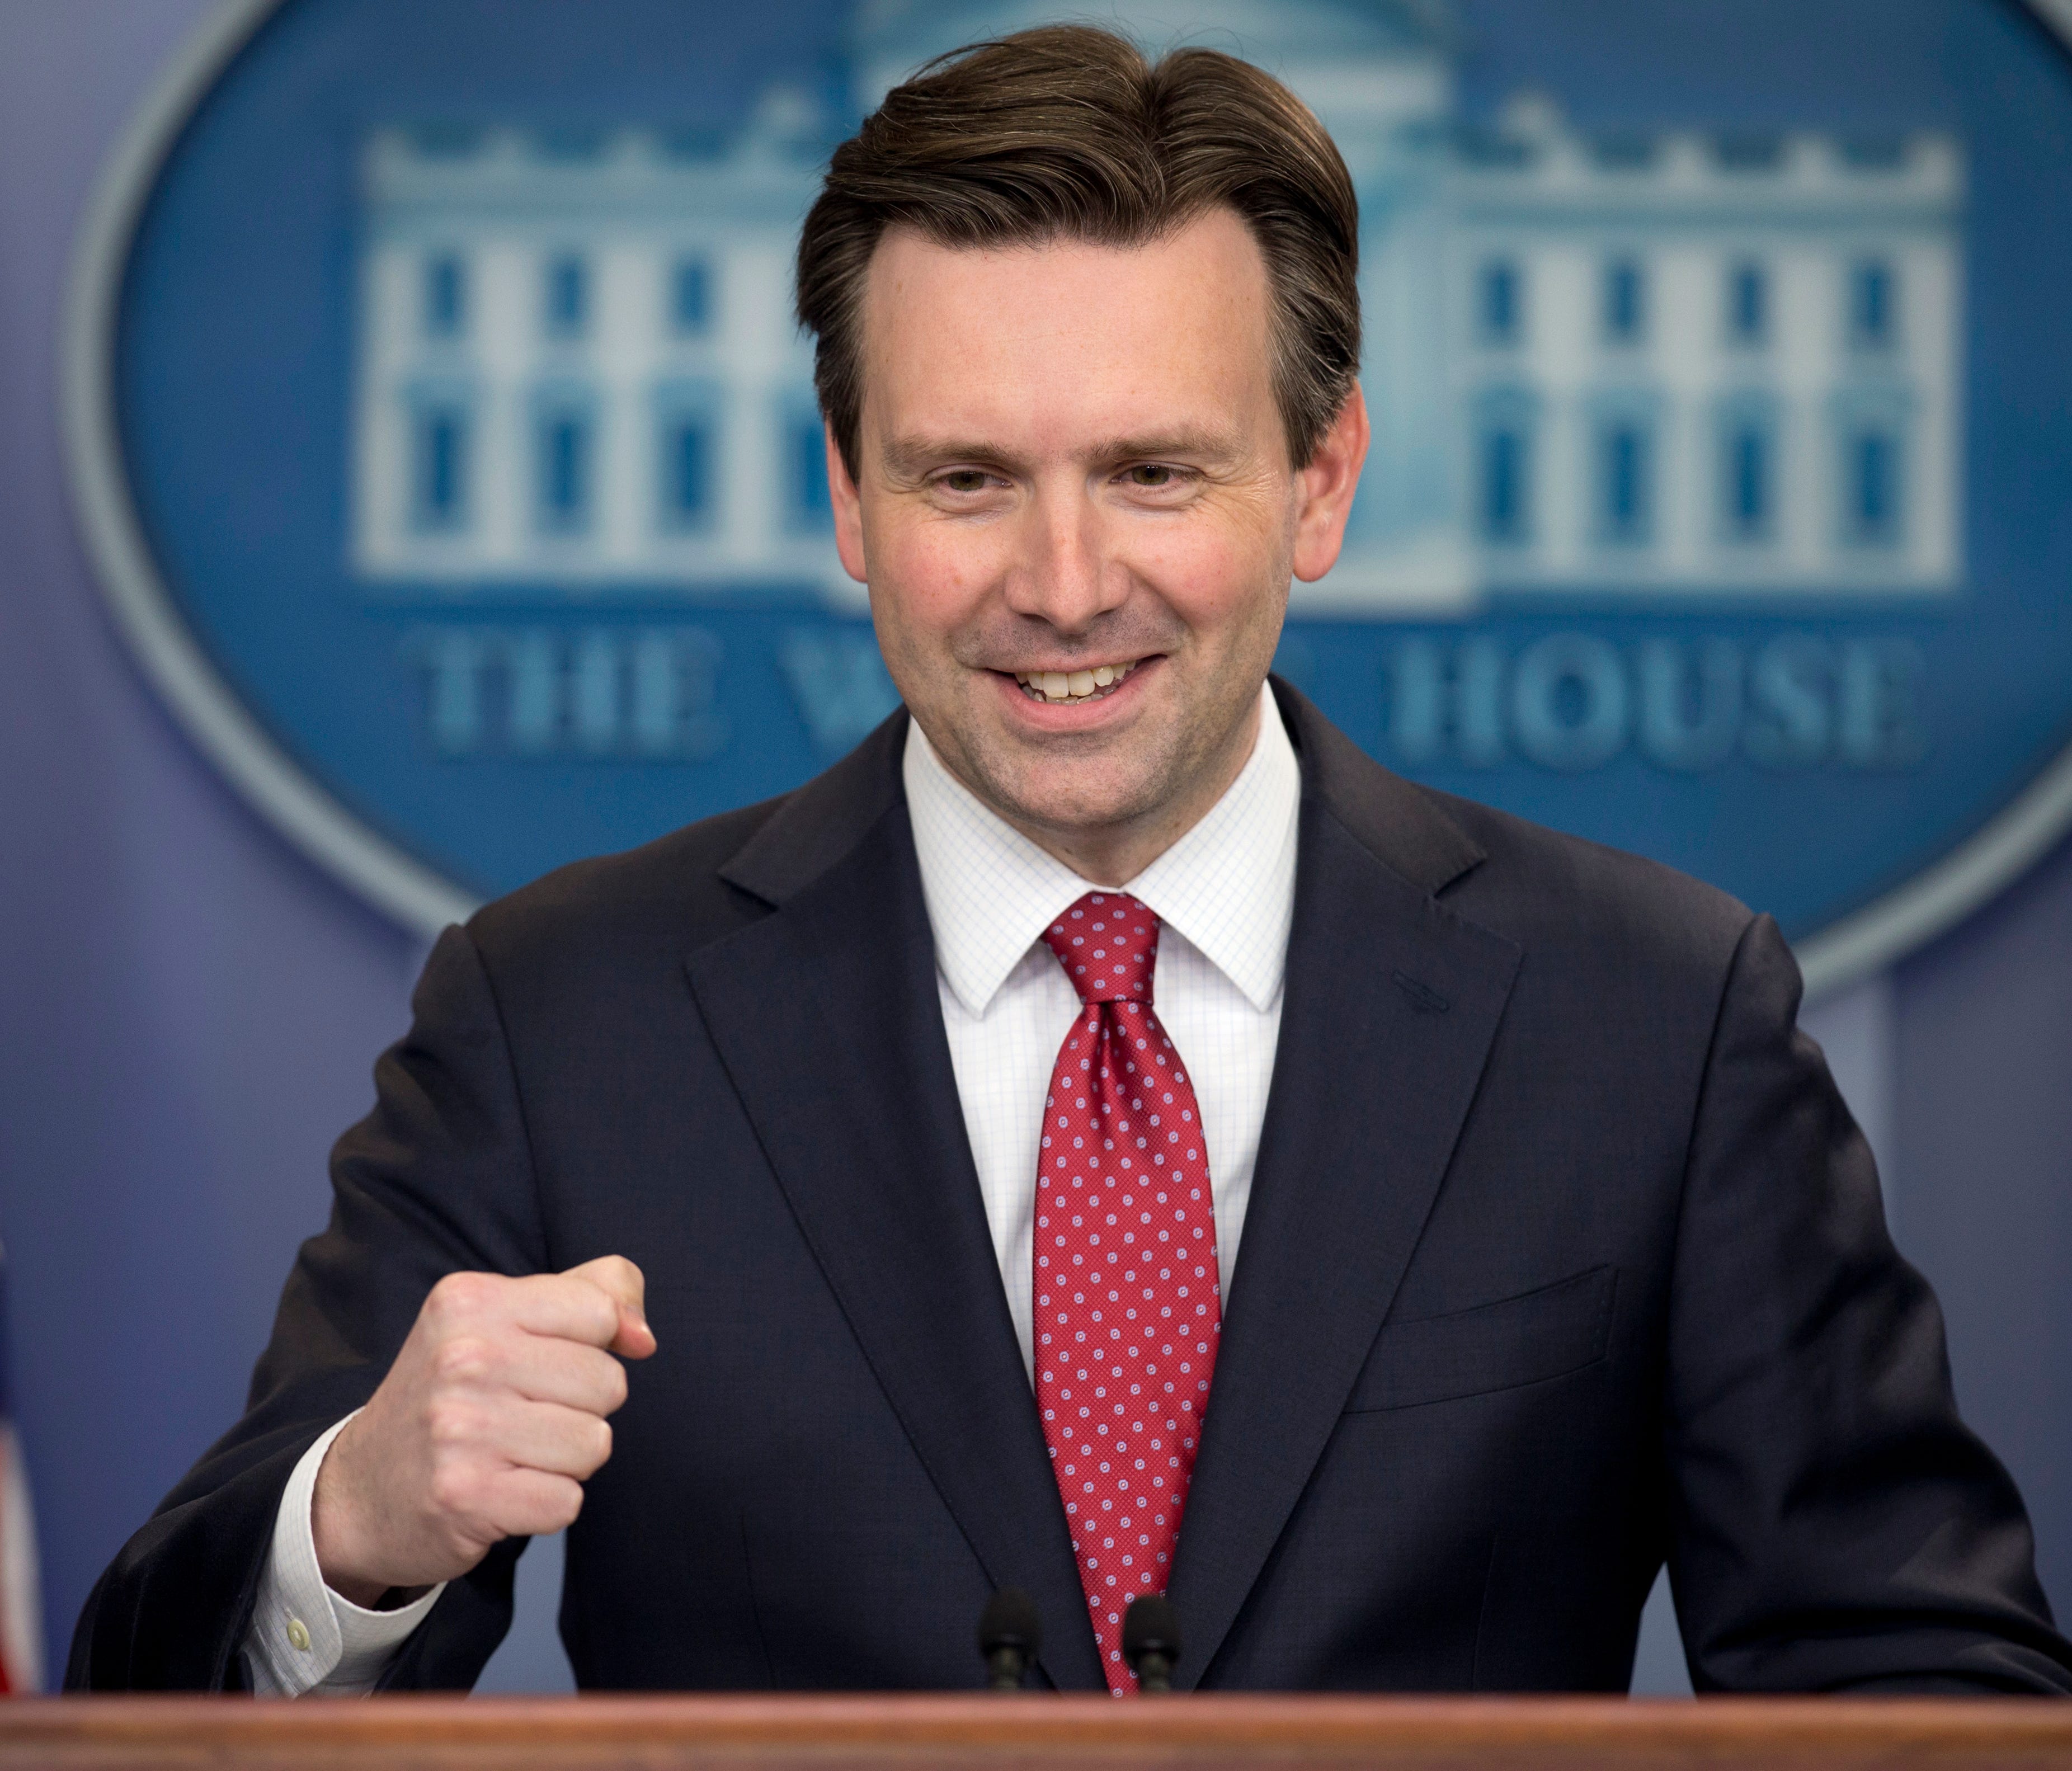 In this file photo from April 2016, White House press secretary Josh Earnest speaks during the daily news briefing at the White House in Washington.